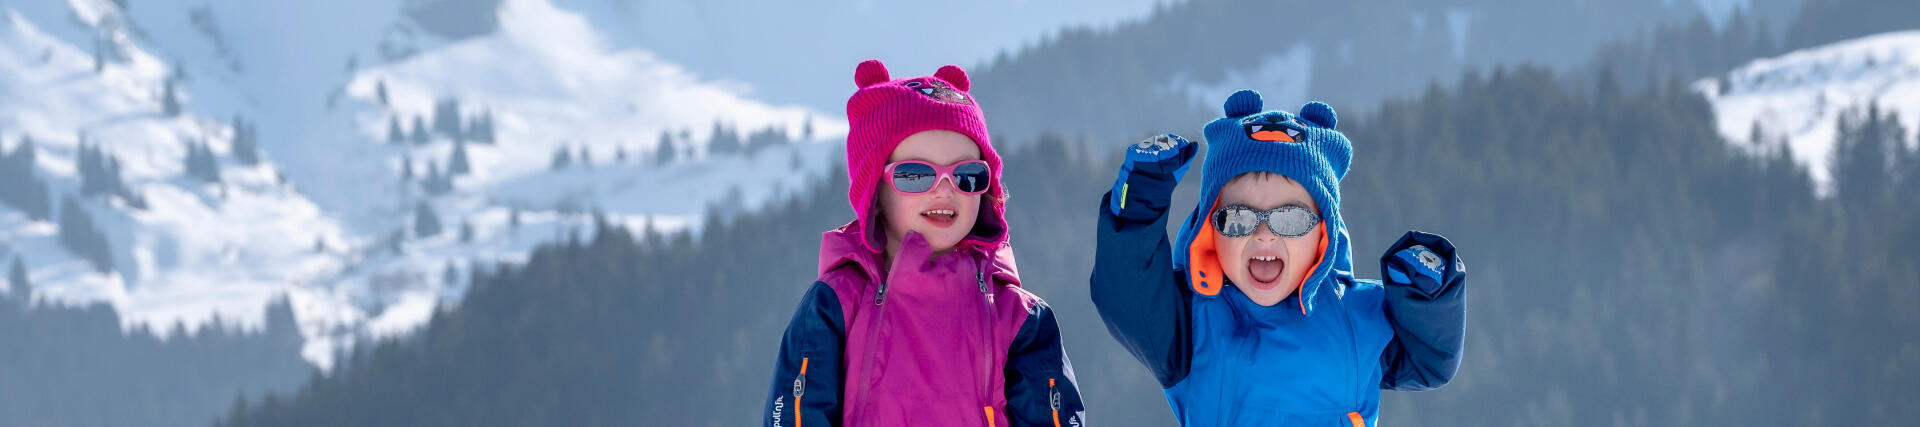 how to dress children properly for skiing 